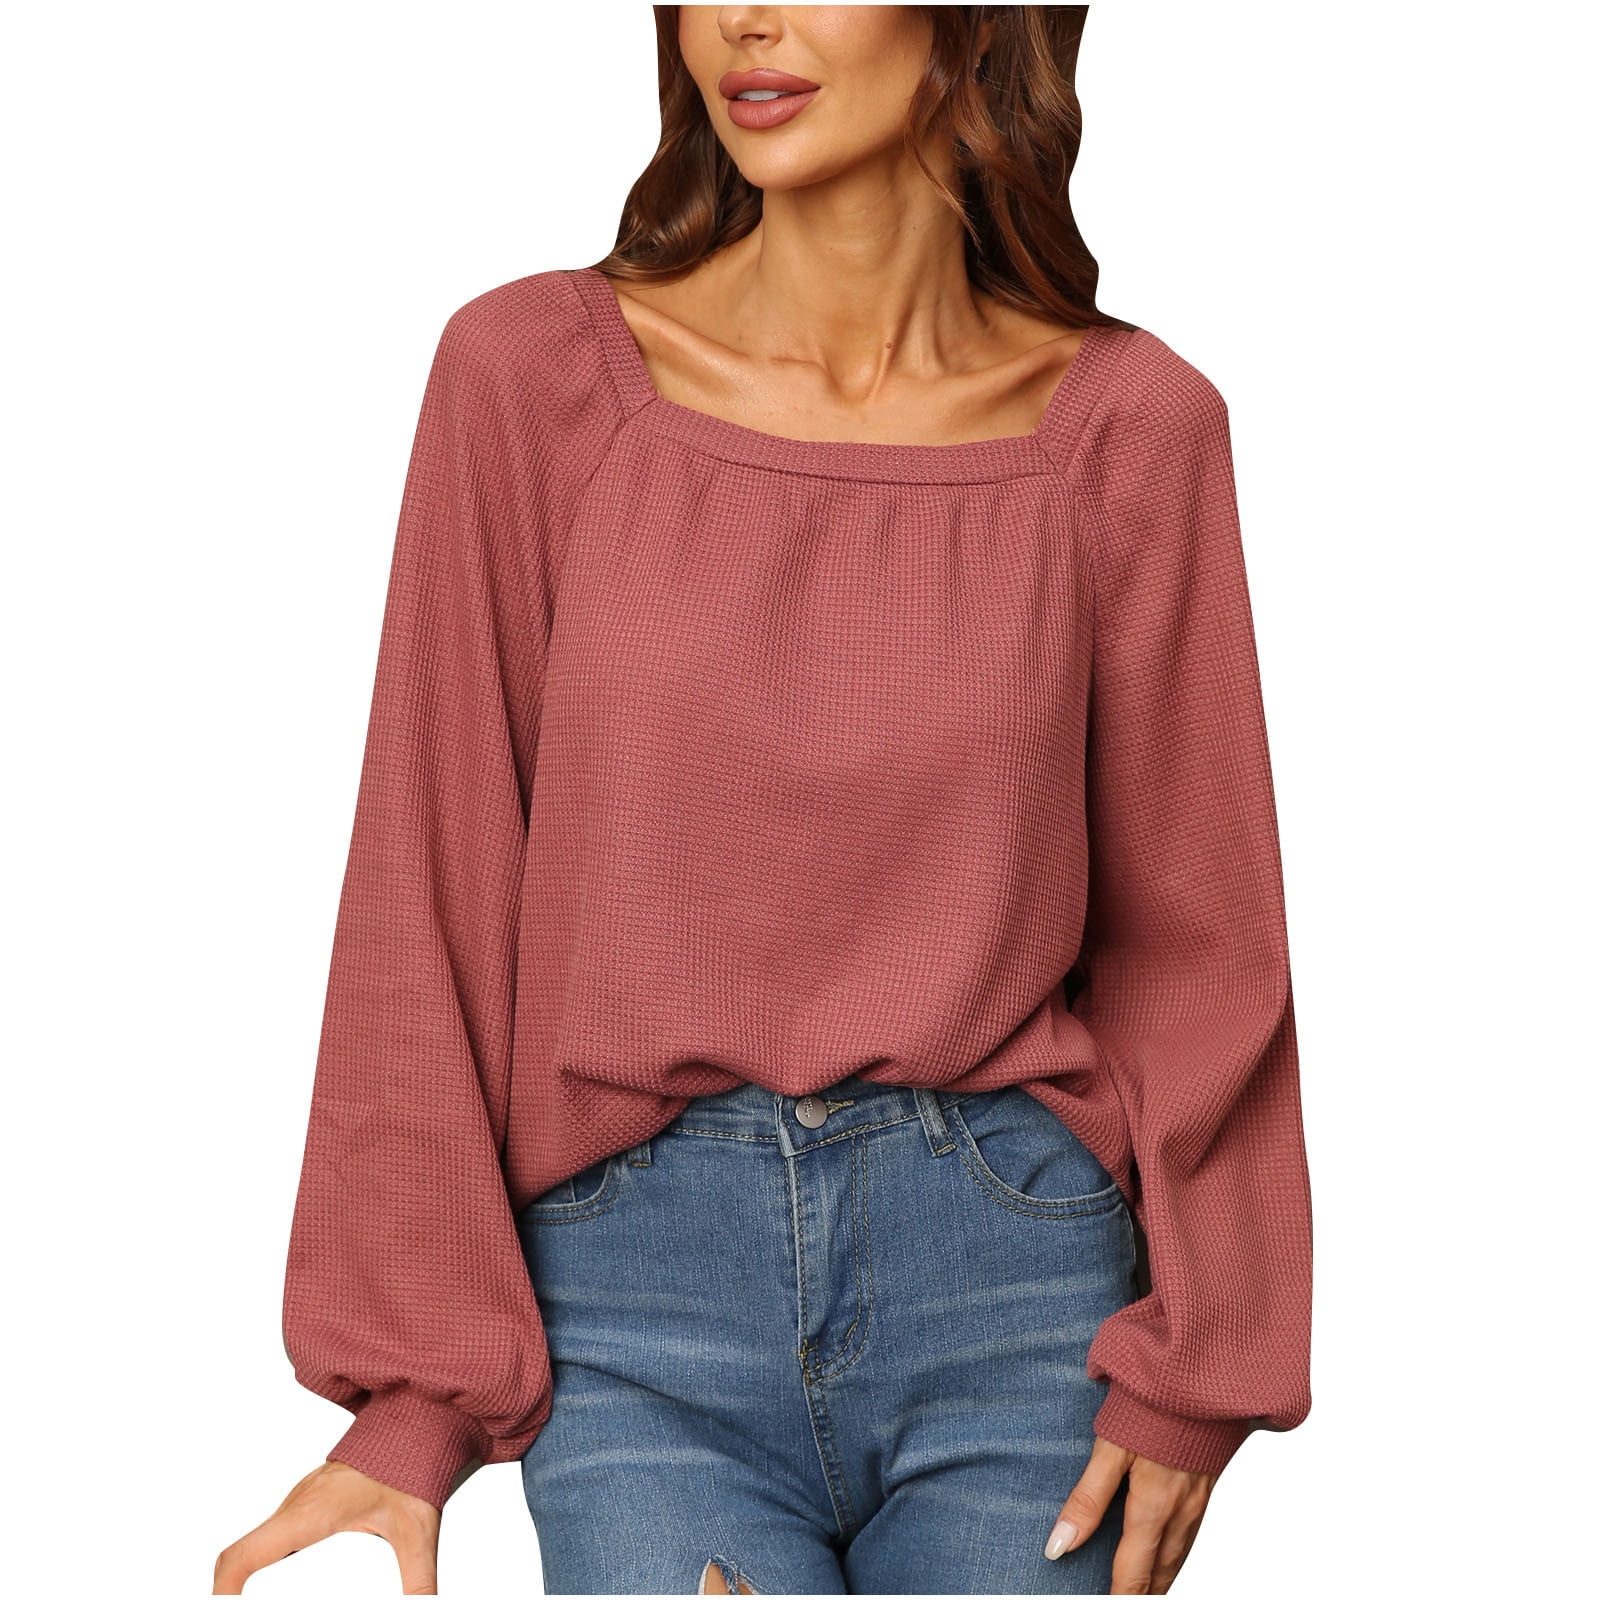 tklpehg Fall Fashion for Women Long Sleeve Casual Tops Solid Color Slim  Comfy Blouse Lightweight Crewneck Trendy Tops Dressy Casual Wine S